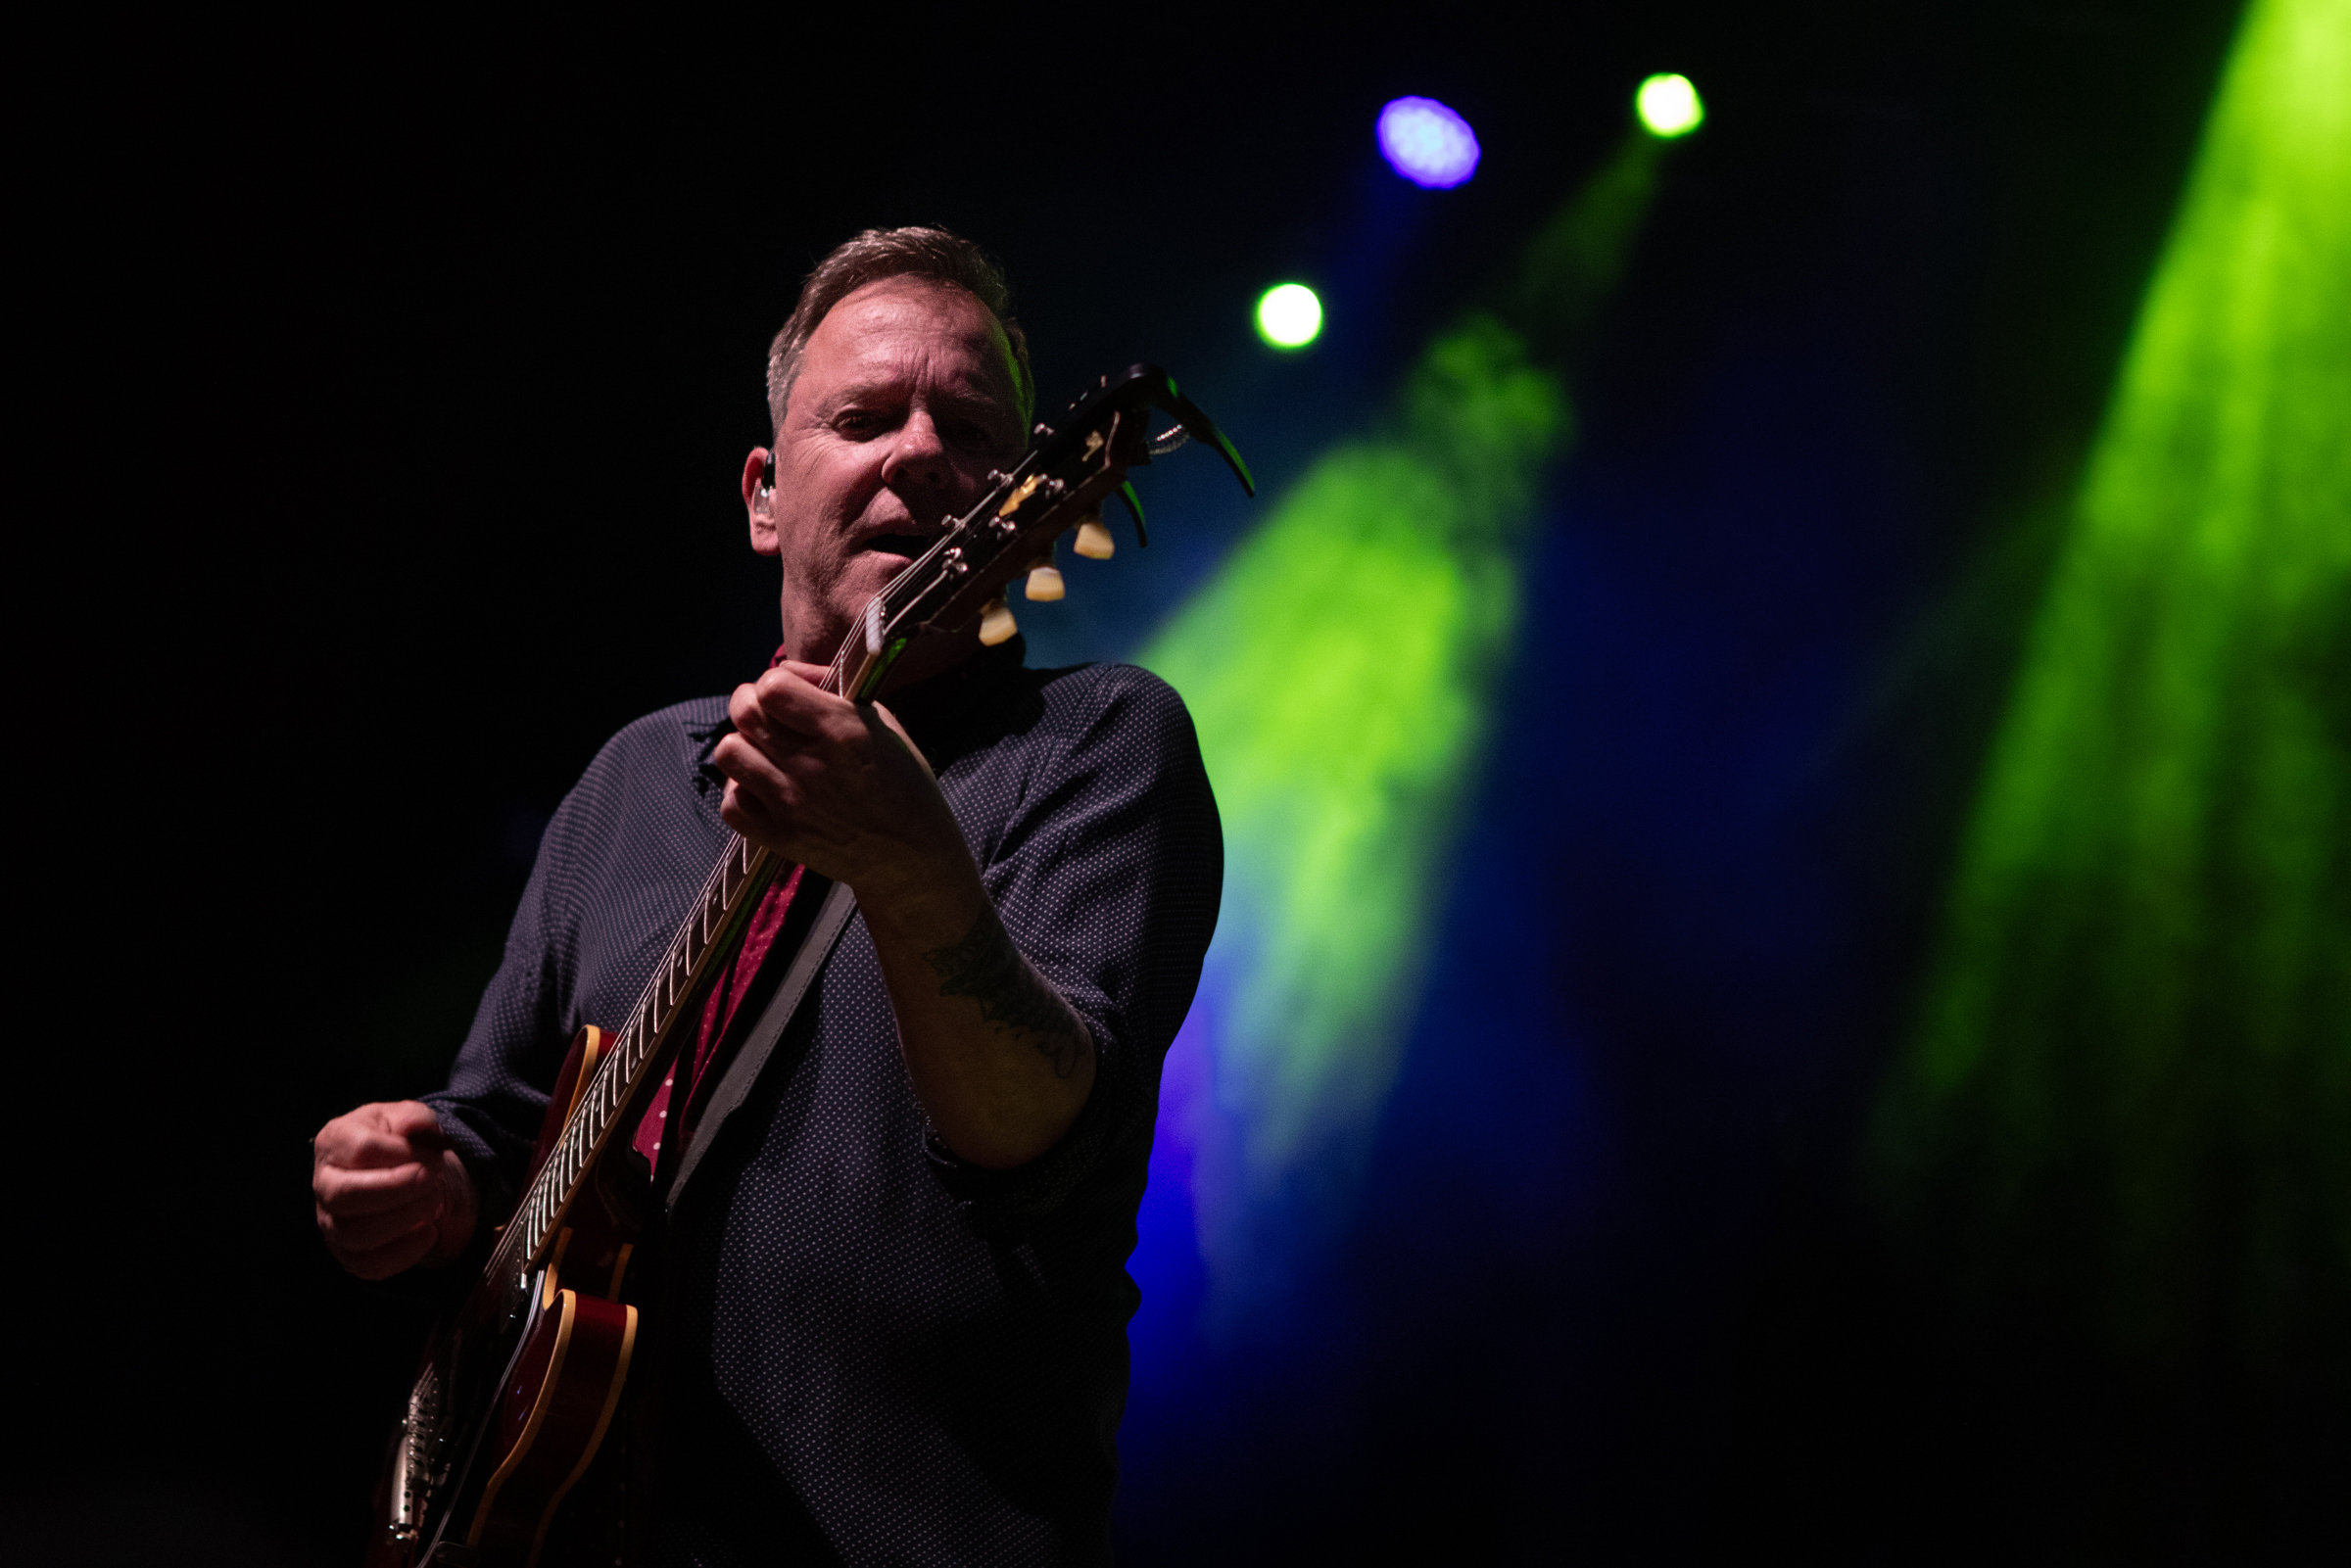 Kiefer Sutherland live in Manchester by Frank Ralph Photography